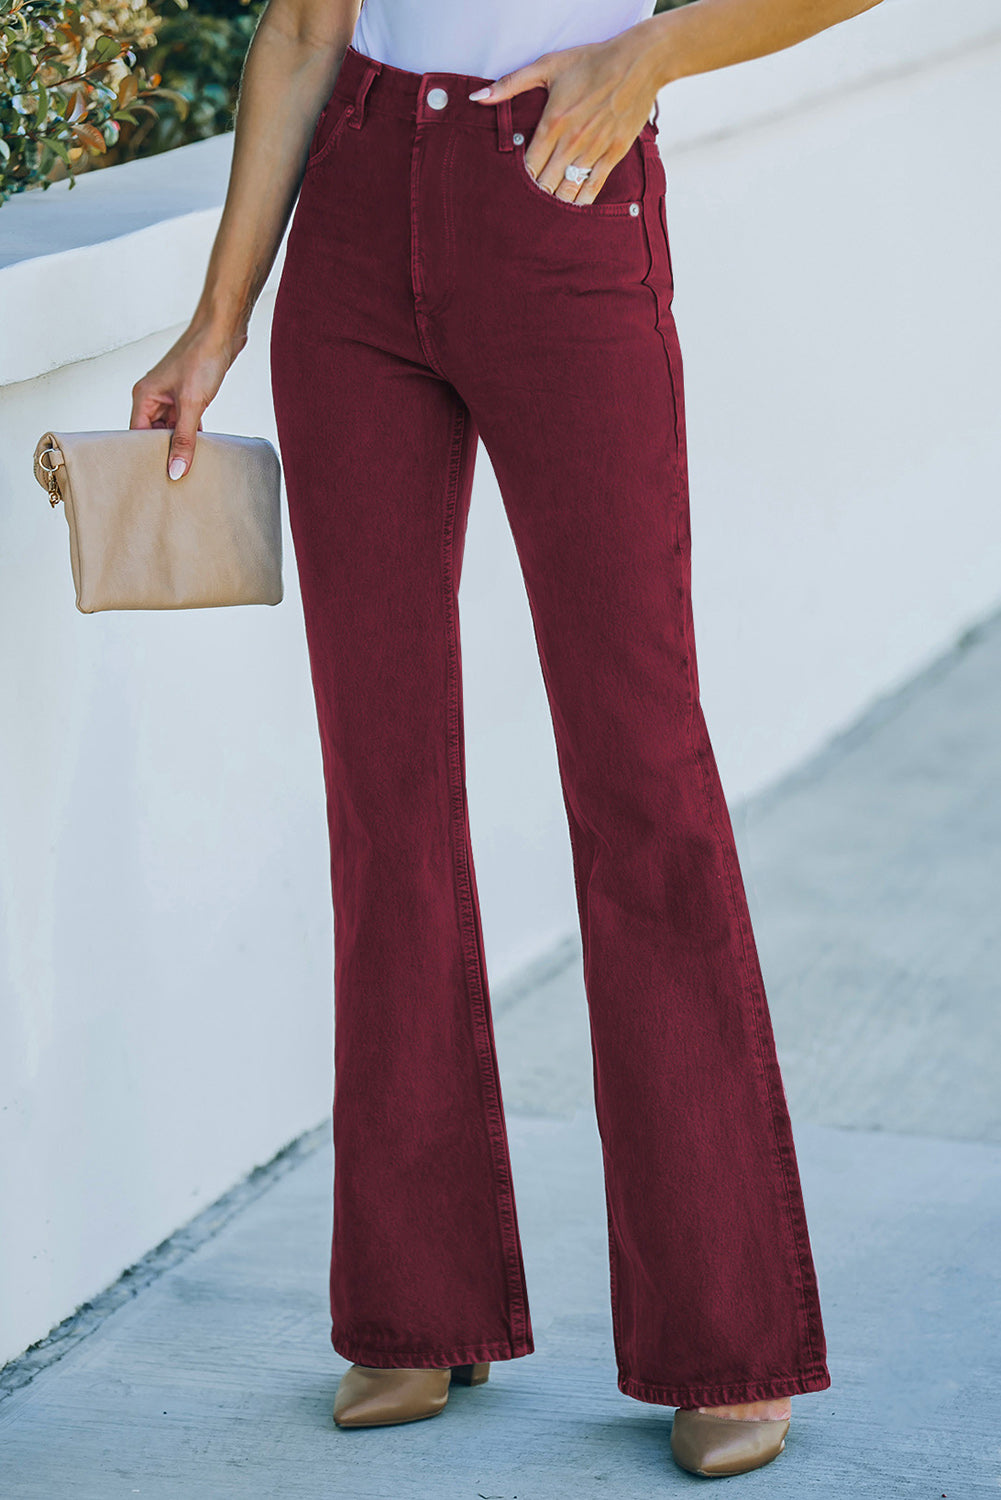 High Waist Flare Jeans with Pockets - Classy Fashion Chic